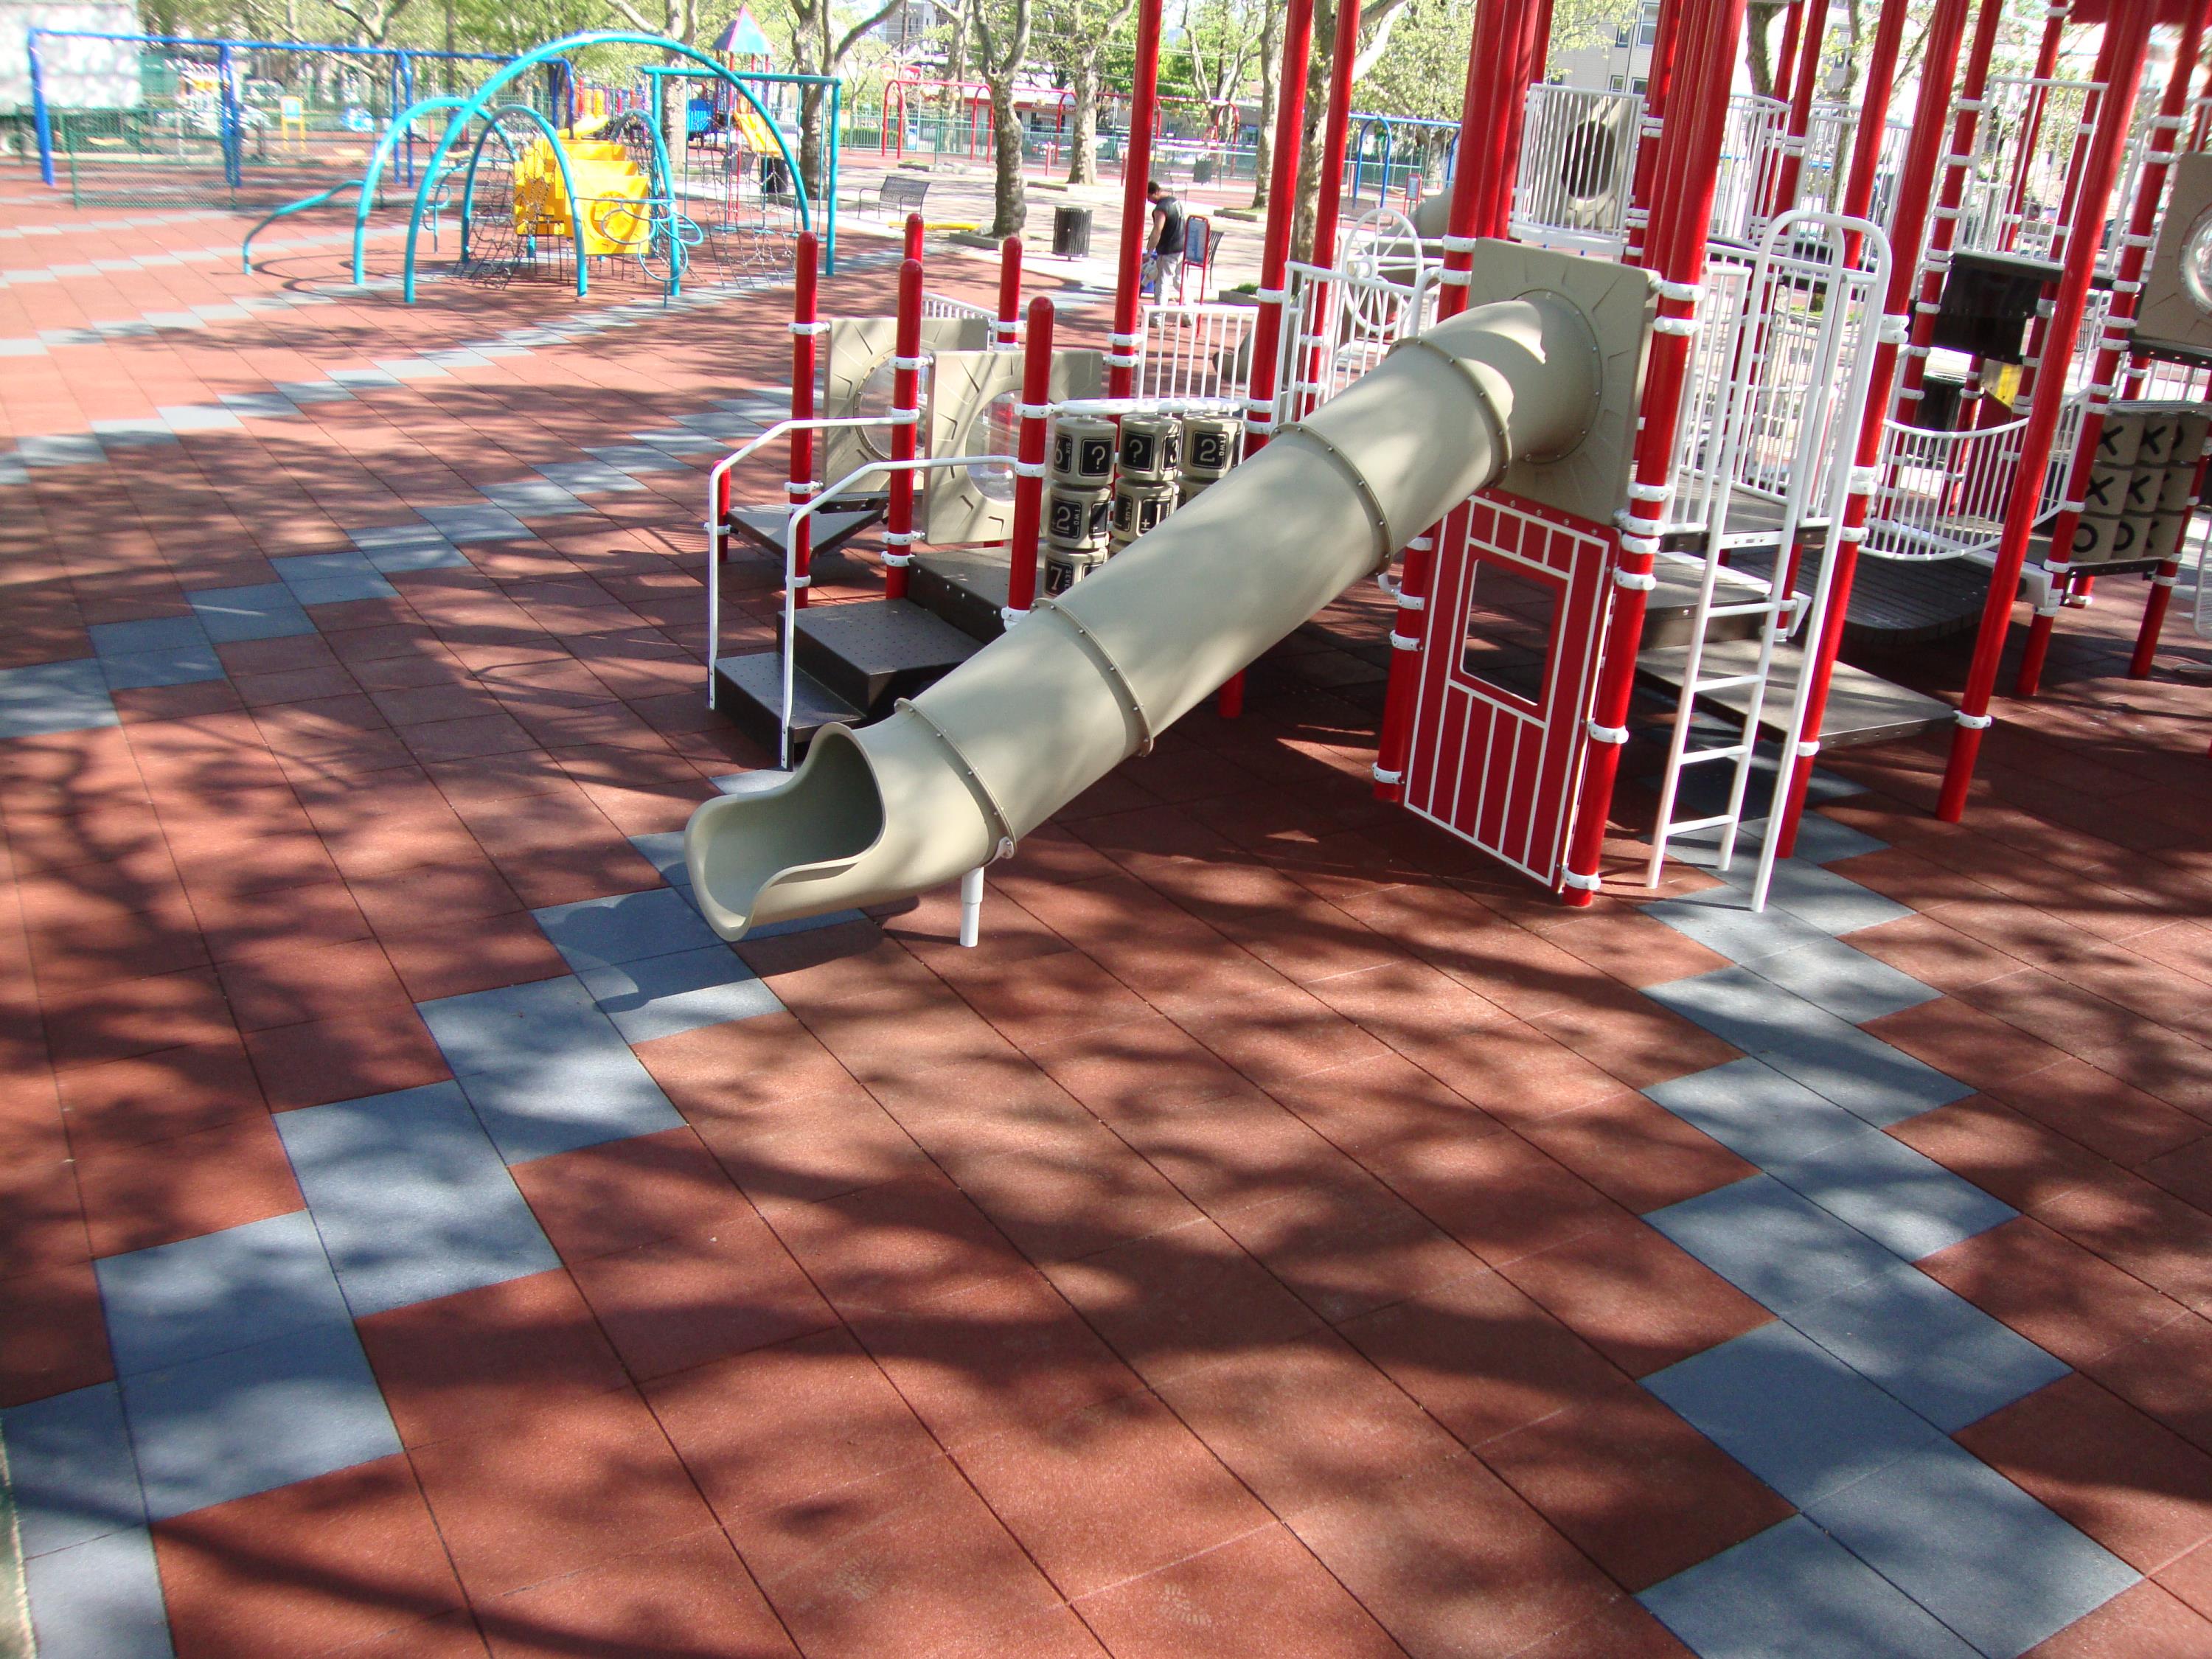 Large Public Park with Multiple Playgrounds Using Designs h